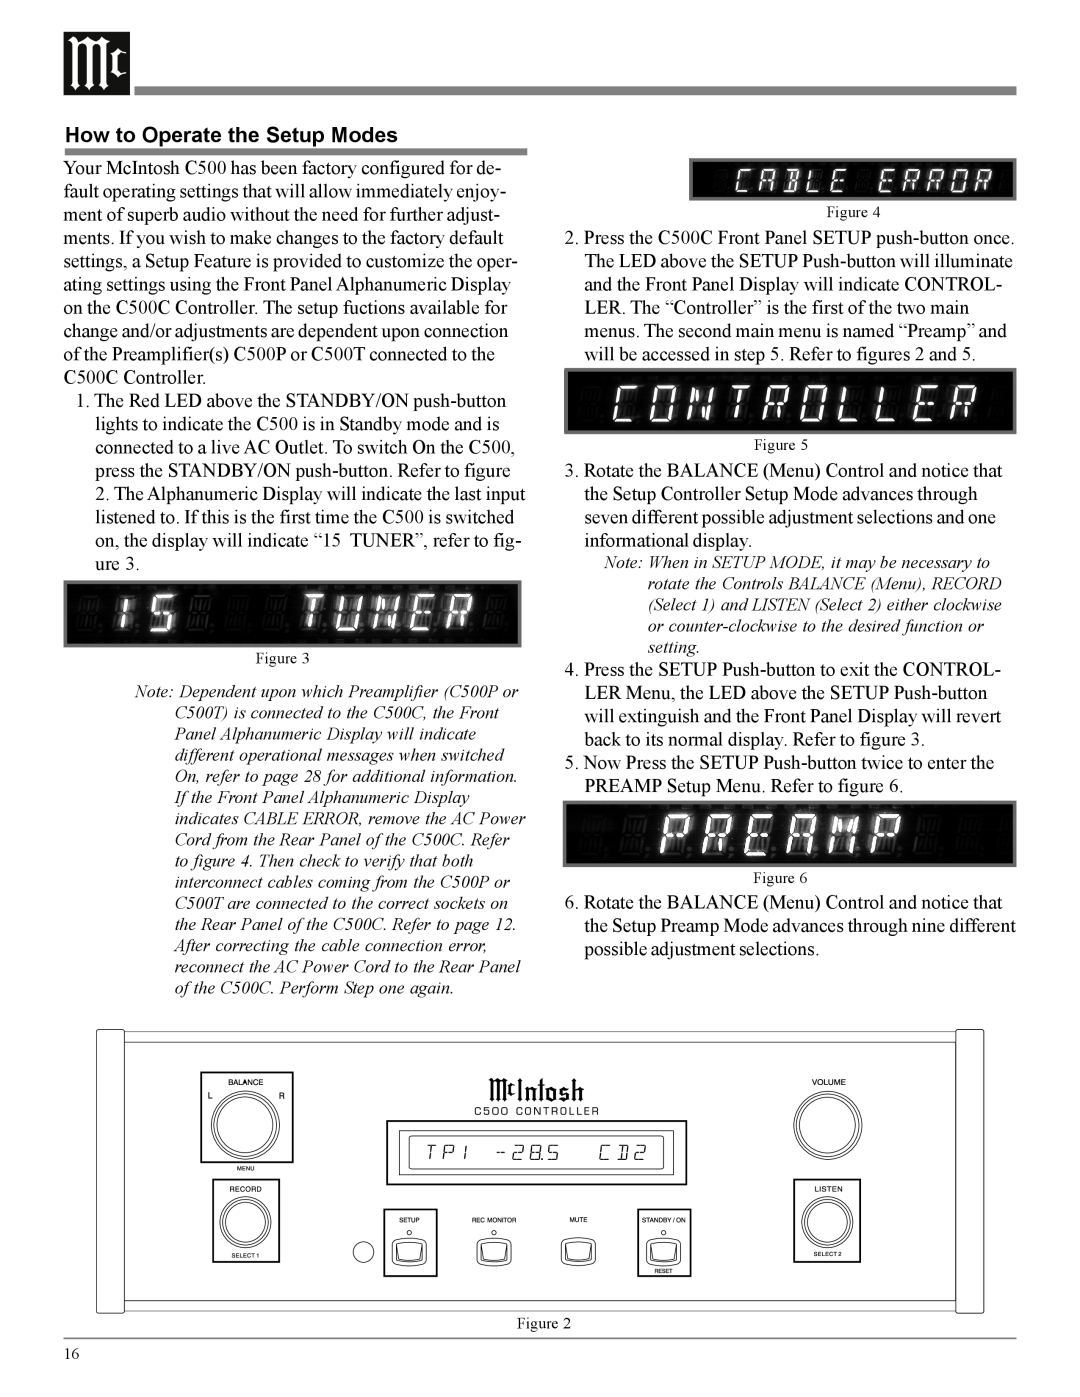 McIntosh C500 owner manual How to Operate the Setup Modes 